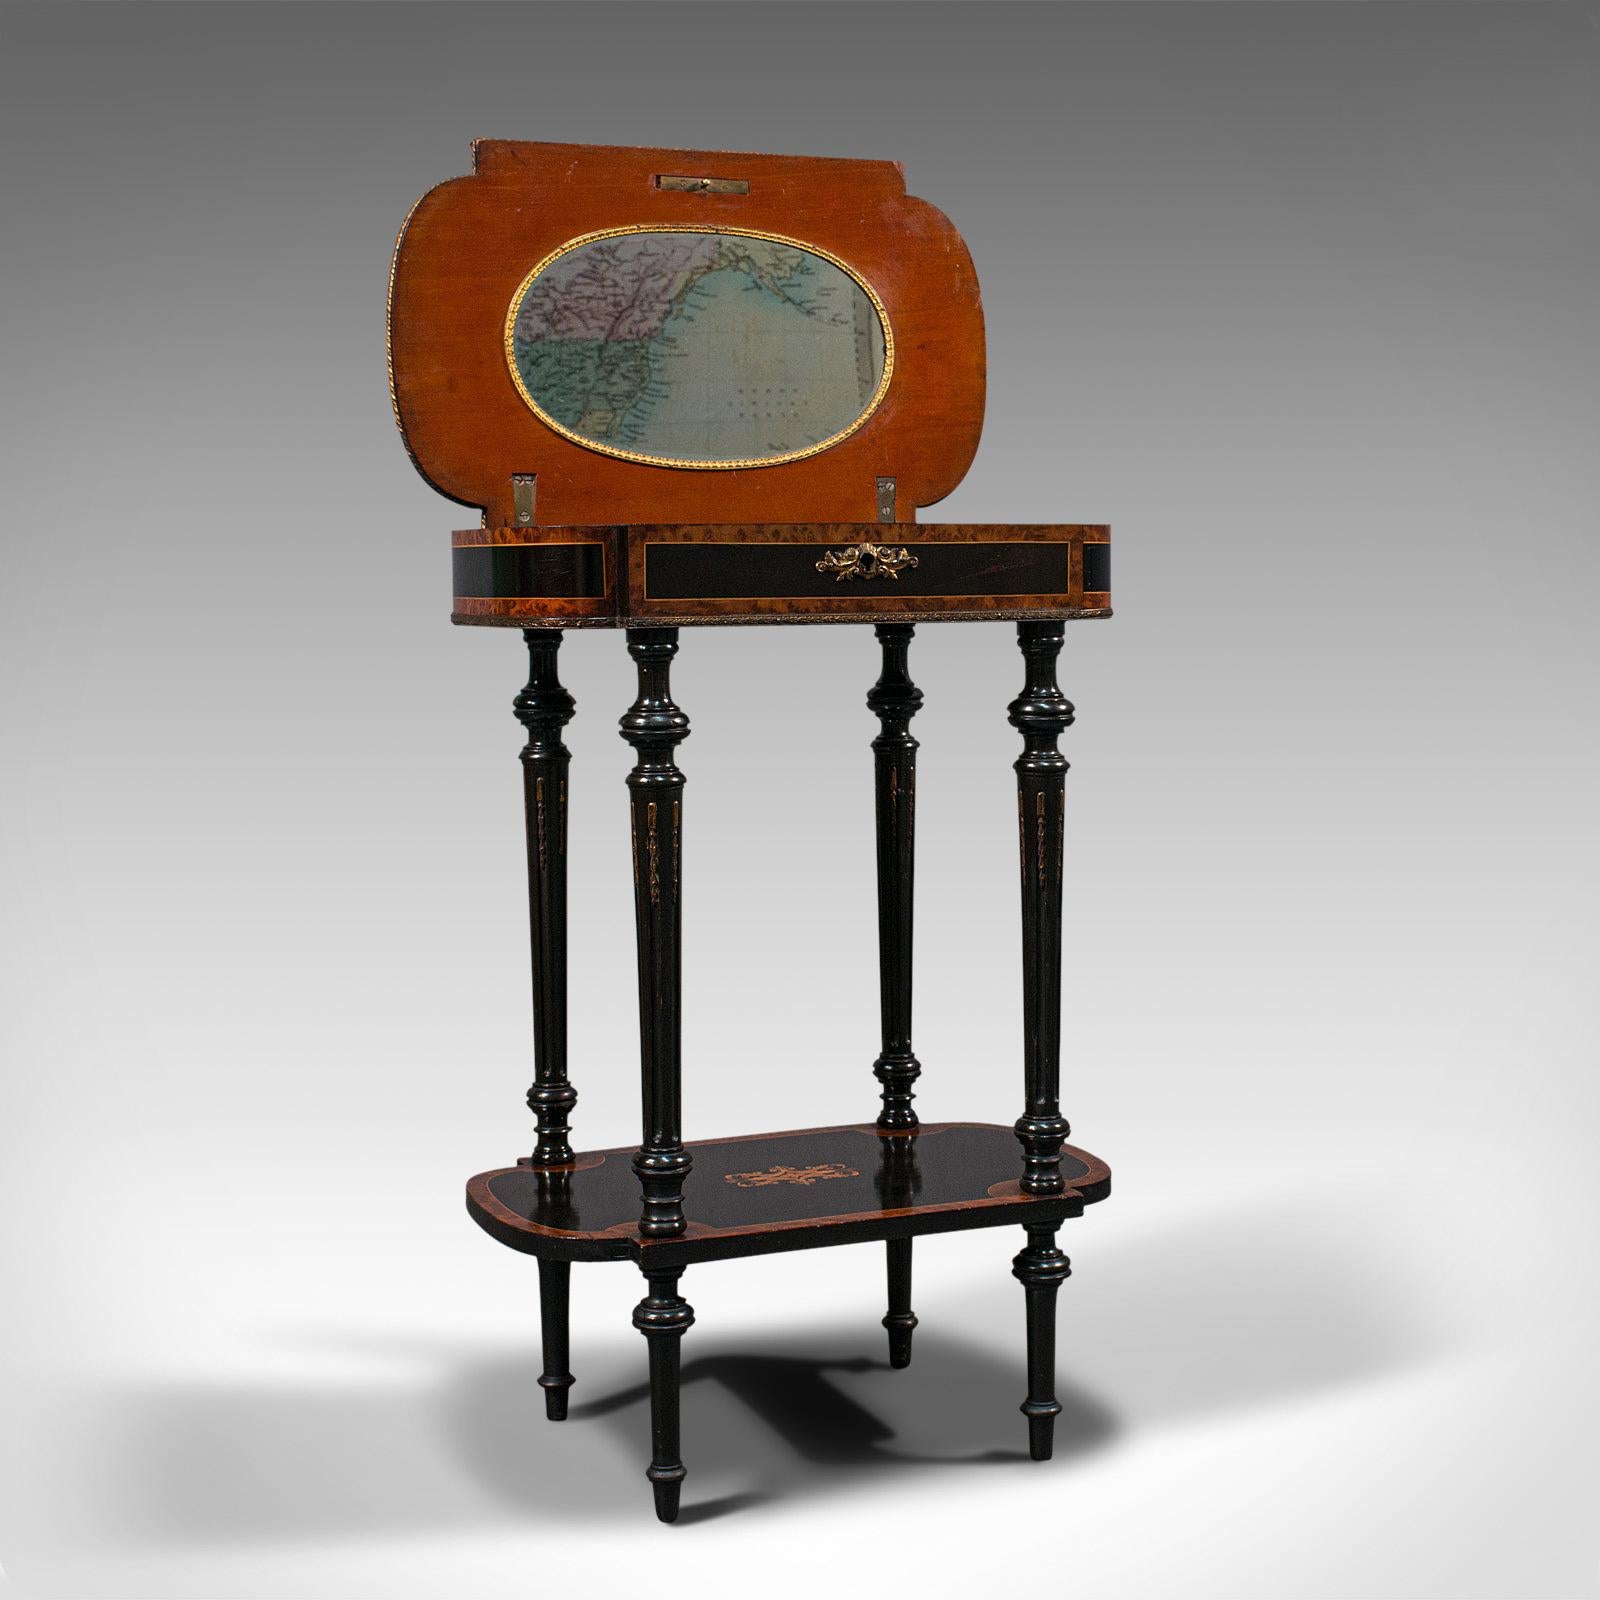 This is an antique Napoleon III side table. A French, ebonised mahogany and burr walnut etagere or sewing table, dating to the late 19th century, circa 1870.

Exquisite craftsmanship a hallmark of the Napoleon III taste
Displaying a desirable